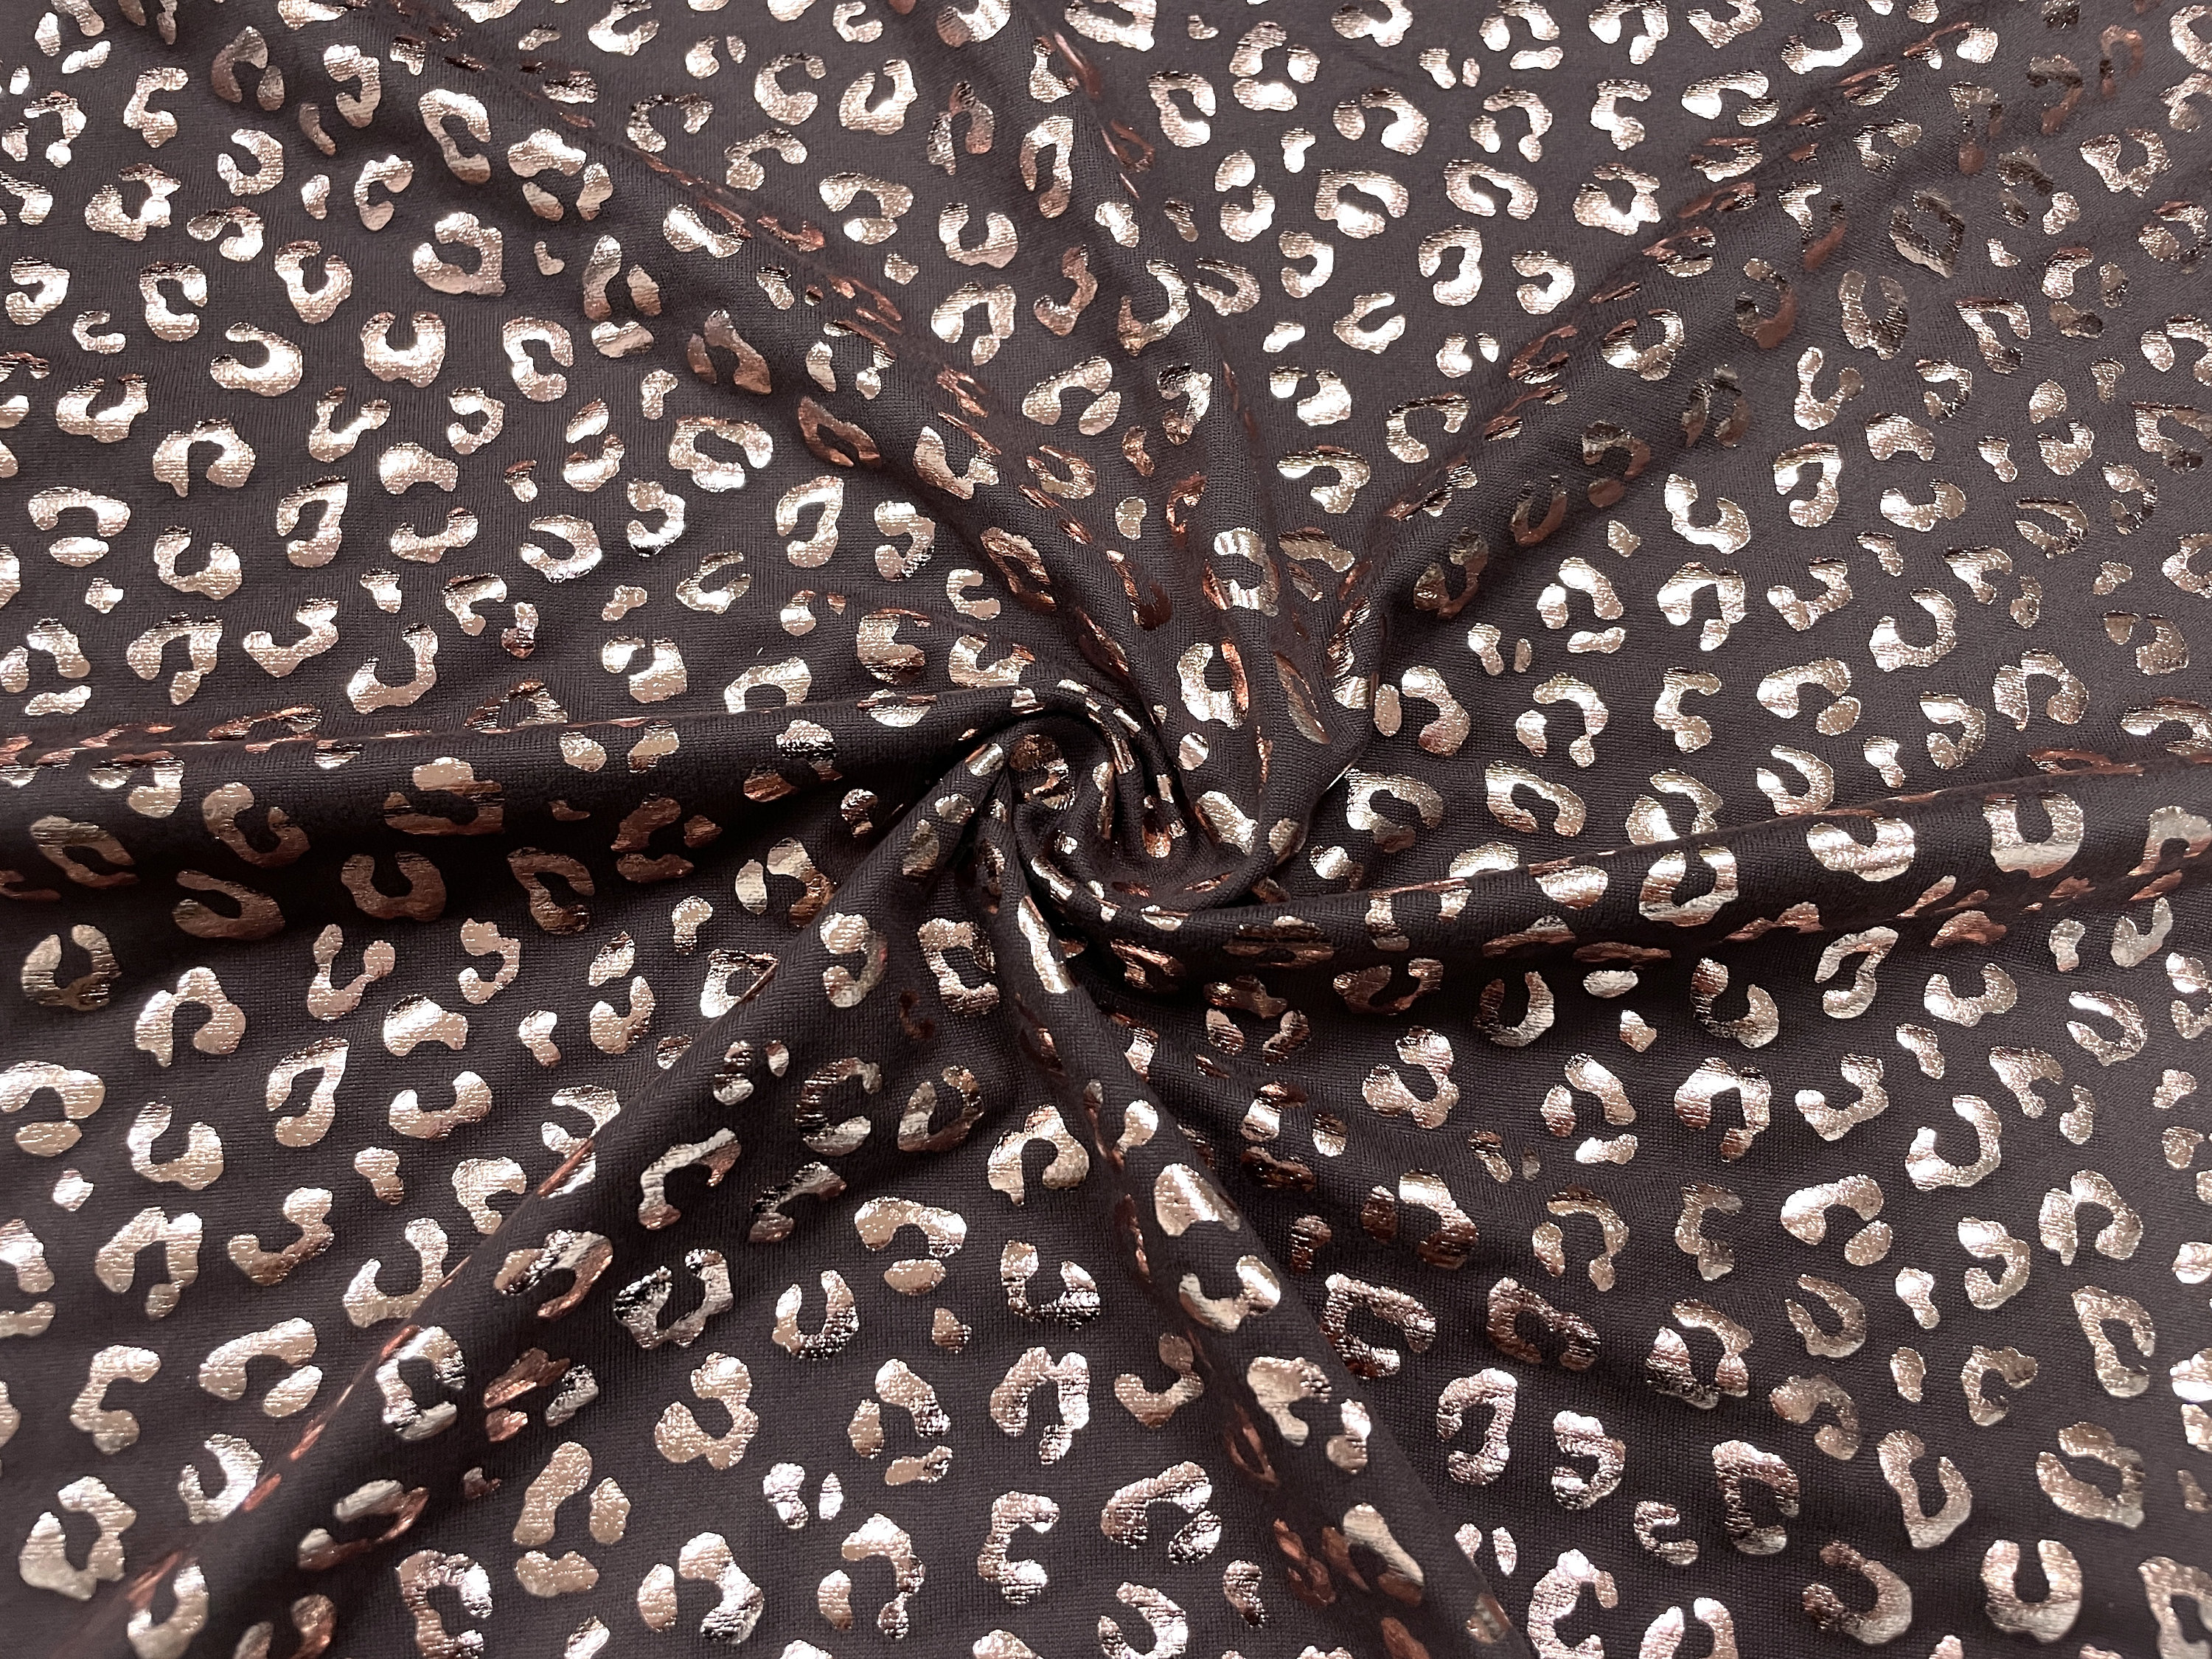 Brown Leopard Rose Gold Metallic DBP Print #425 Double Brushed Polyester Spandex Apparel Stretch Fabric 190 GSM 58-60 Wide By The Yard